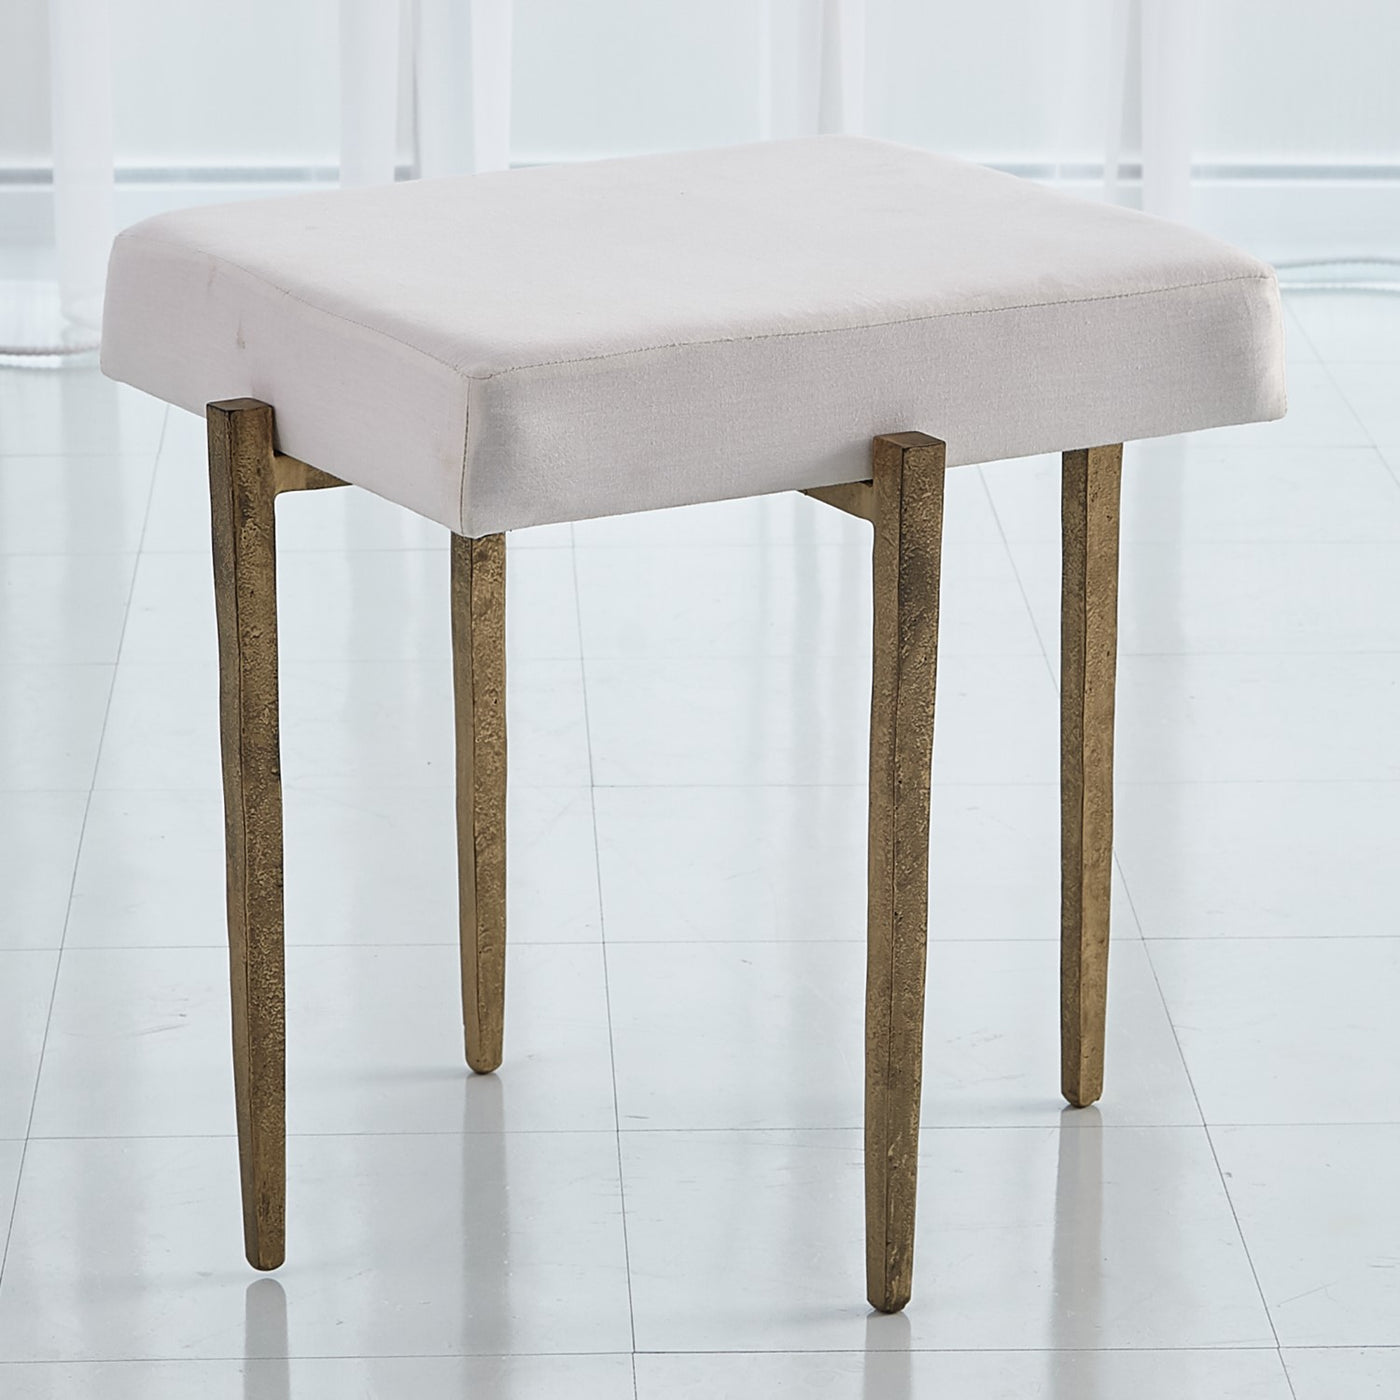 BENCH ANTIQUE GOLD WITH MUSLIN CUSHION